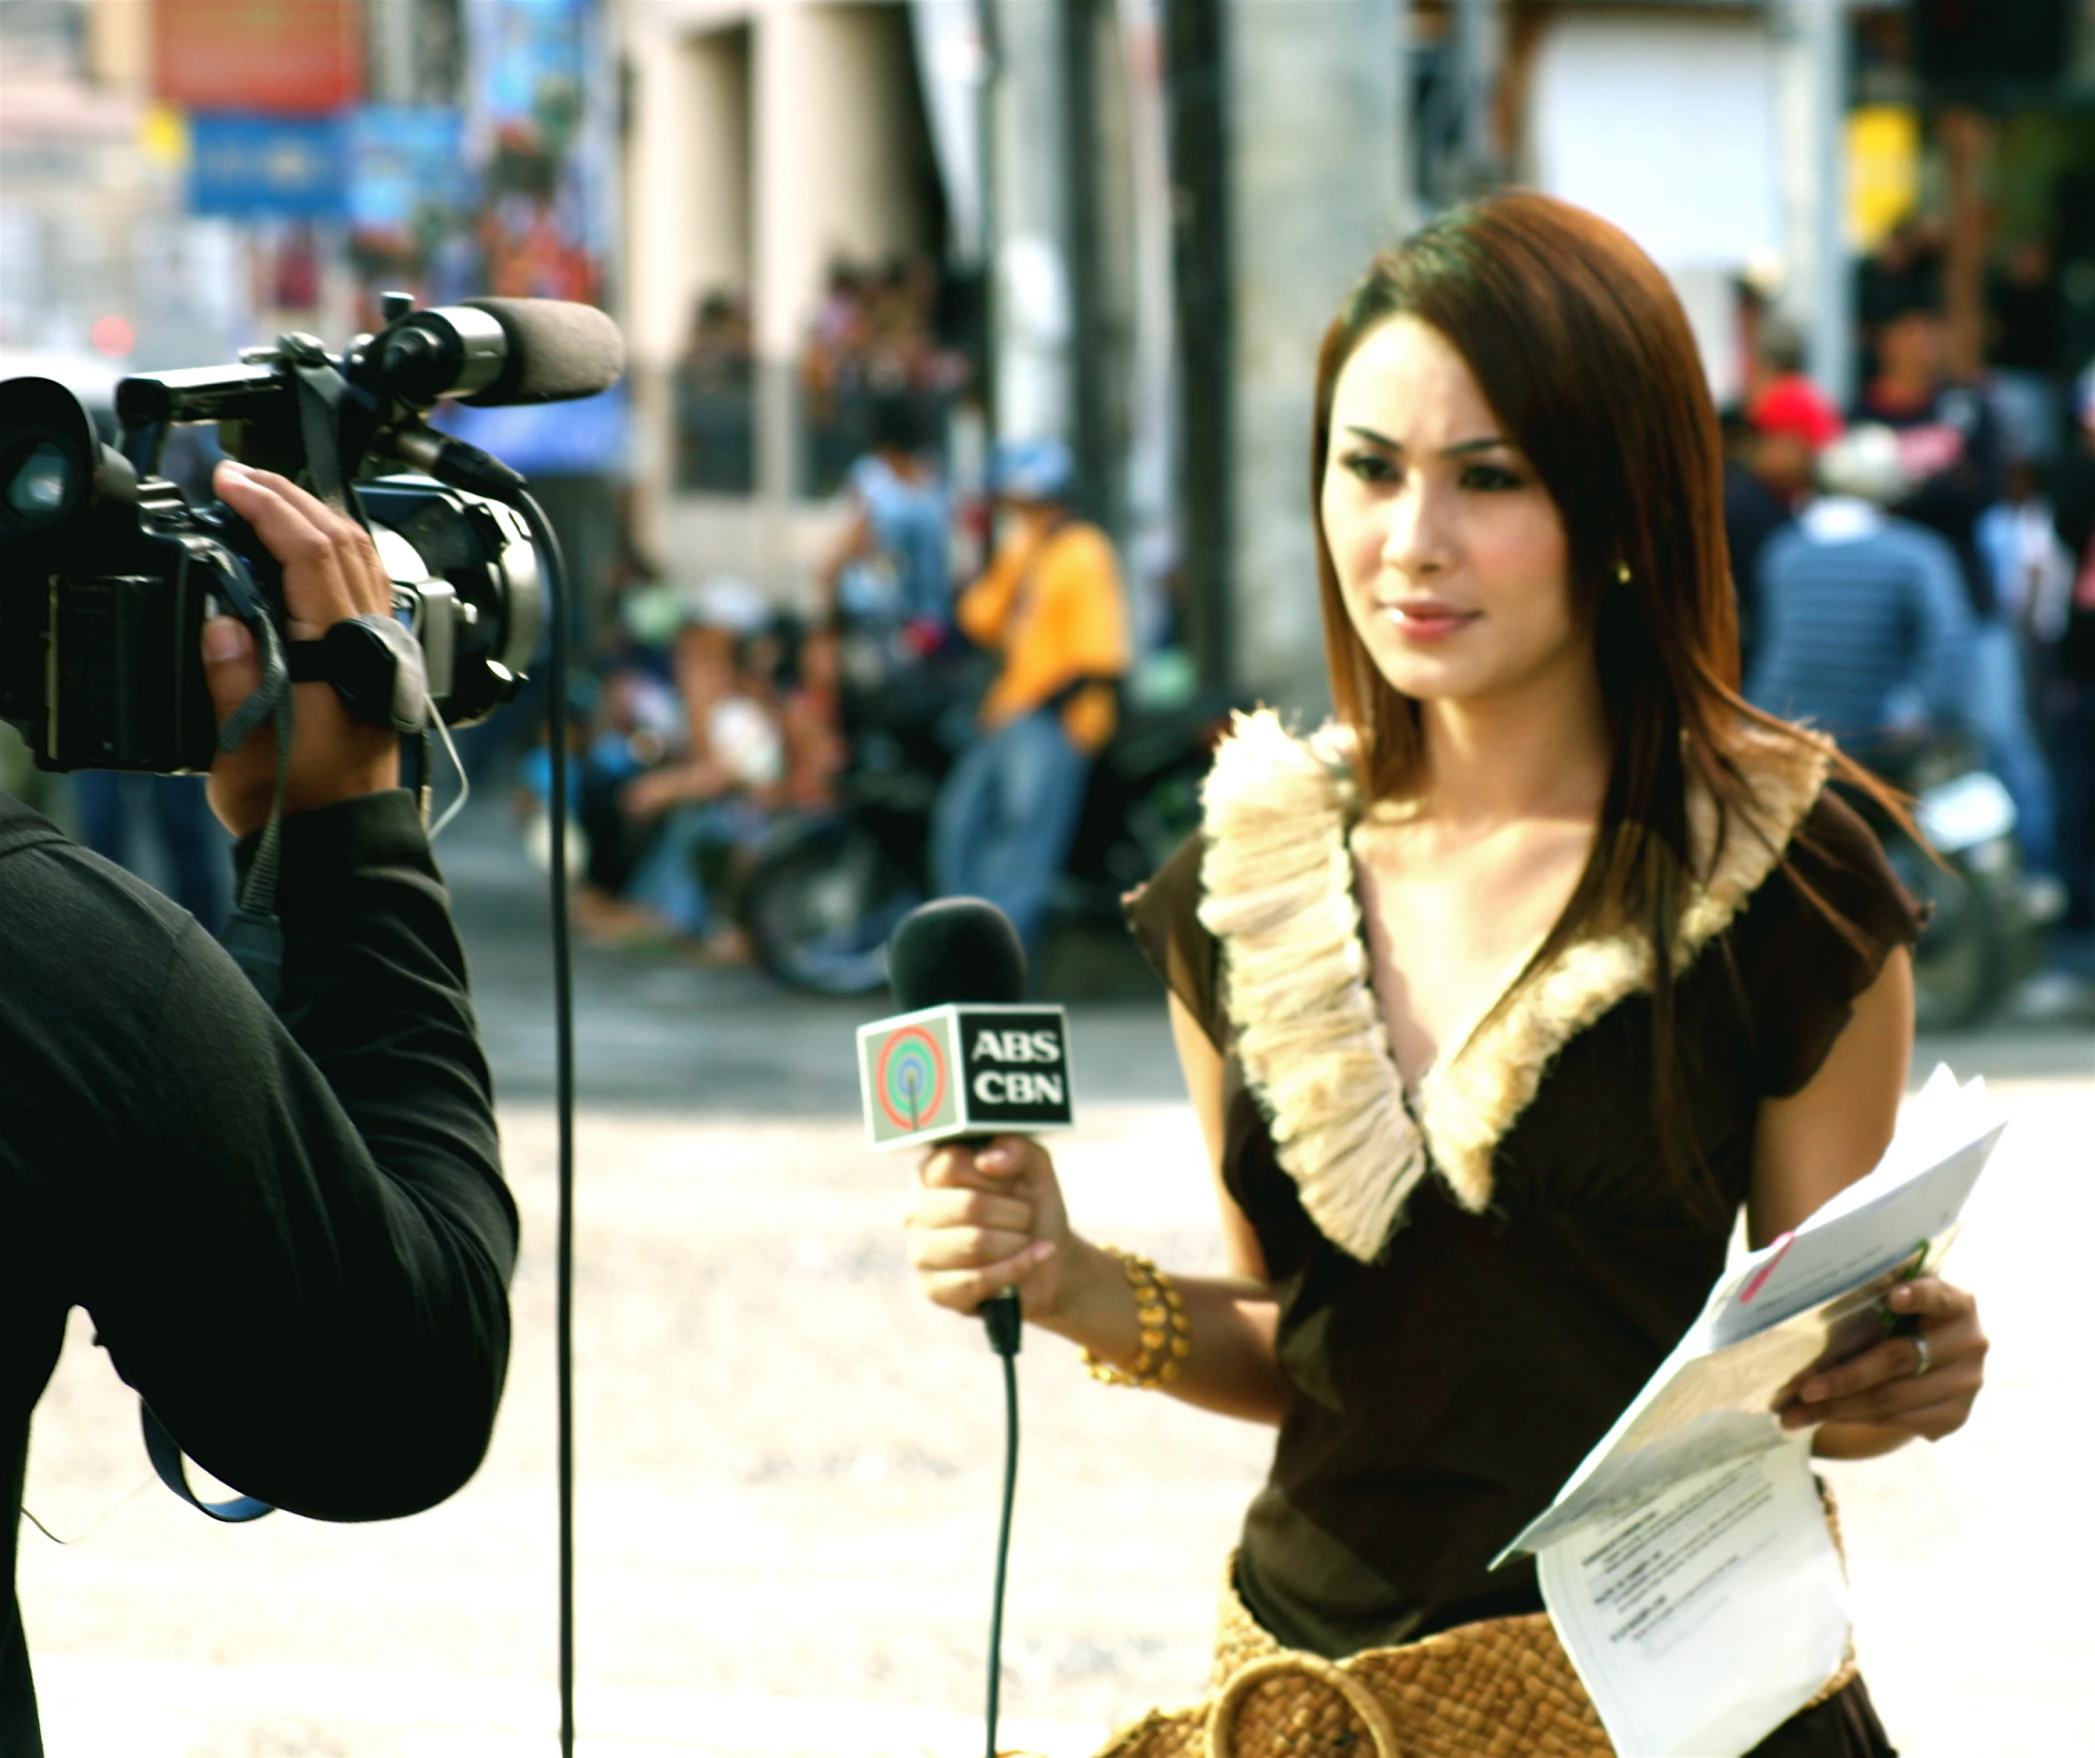 a female wearing a brown top is holding a microphone